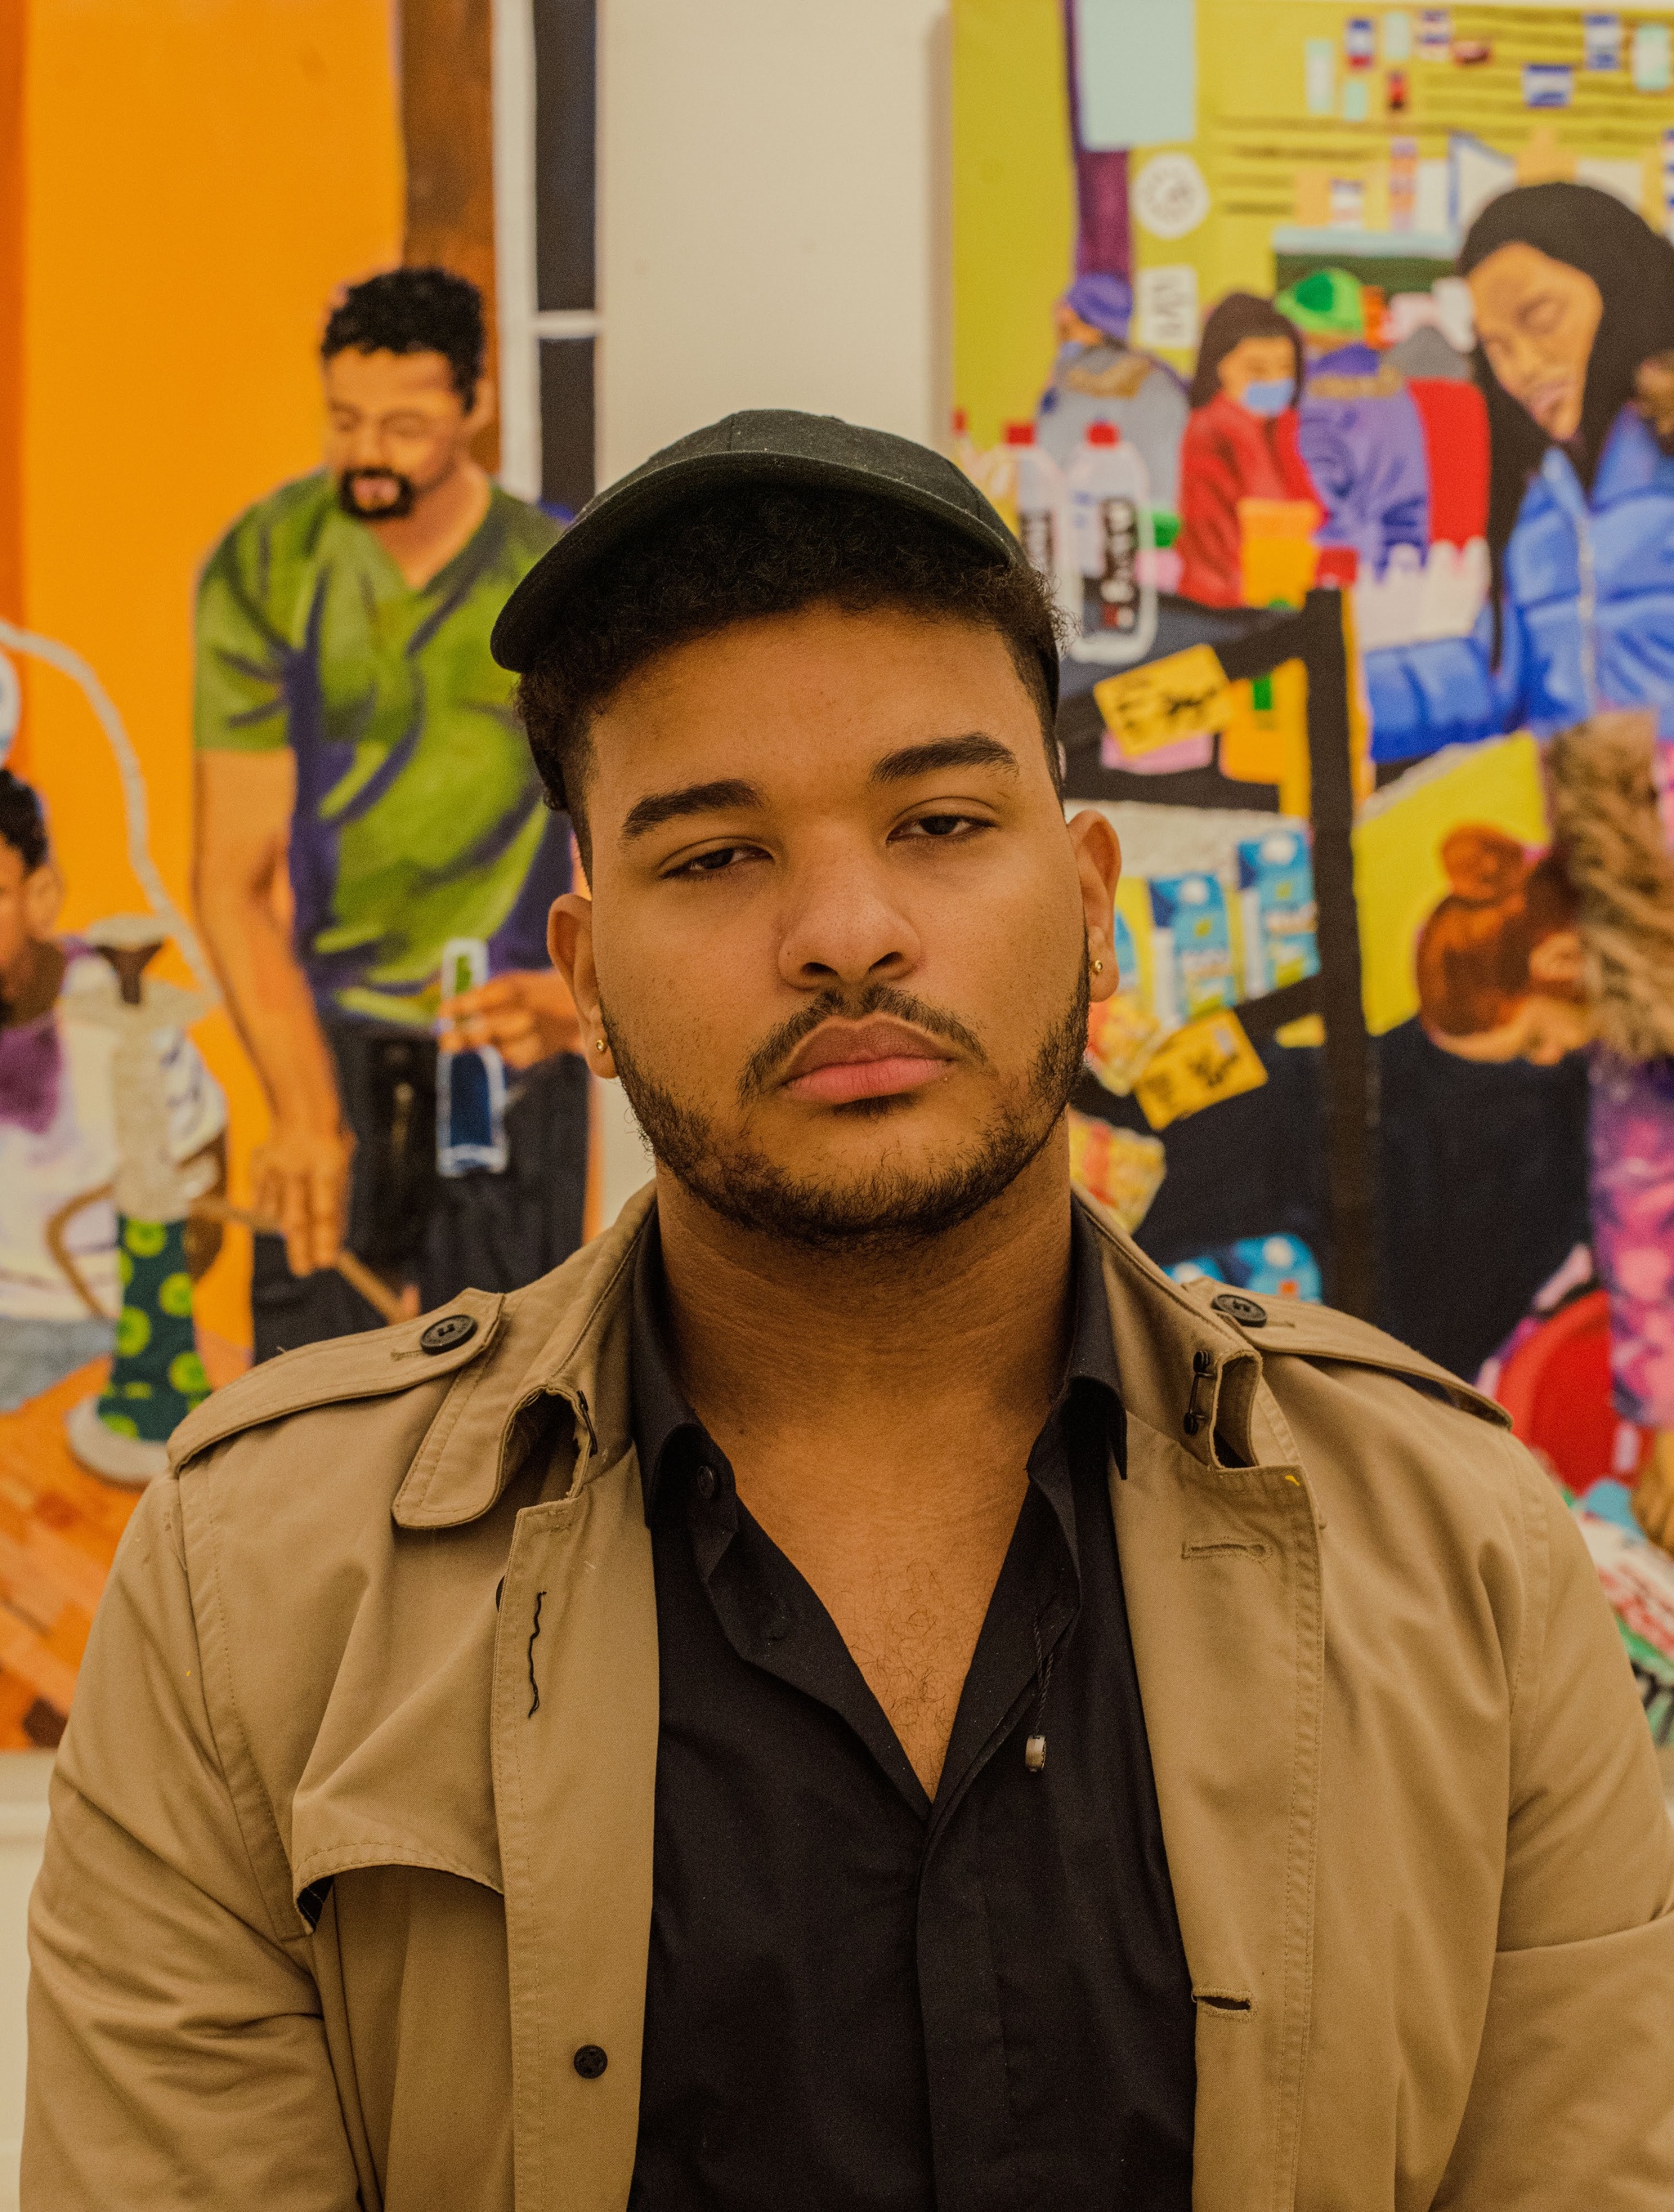 A headshot of Bryan Fernandez, a Dominican artist. He wears a dark cap and a tan jacket over a black shirt. He has a mustache and trimmed beard and poses in front of a painting. Photo by Kiara Terrero